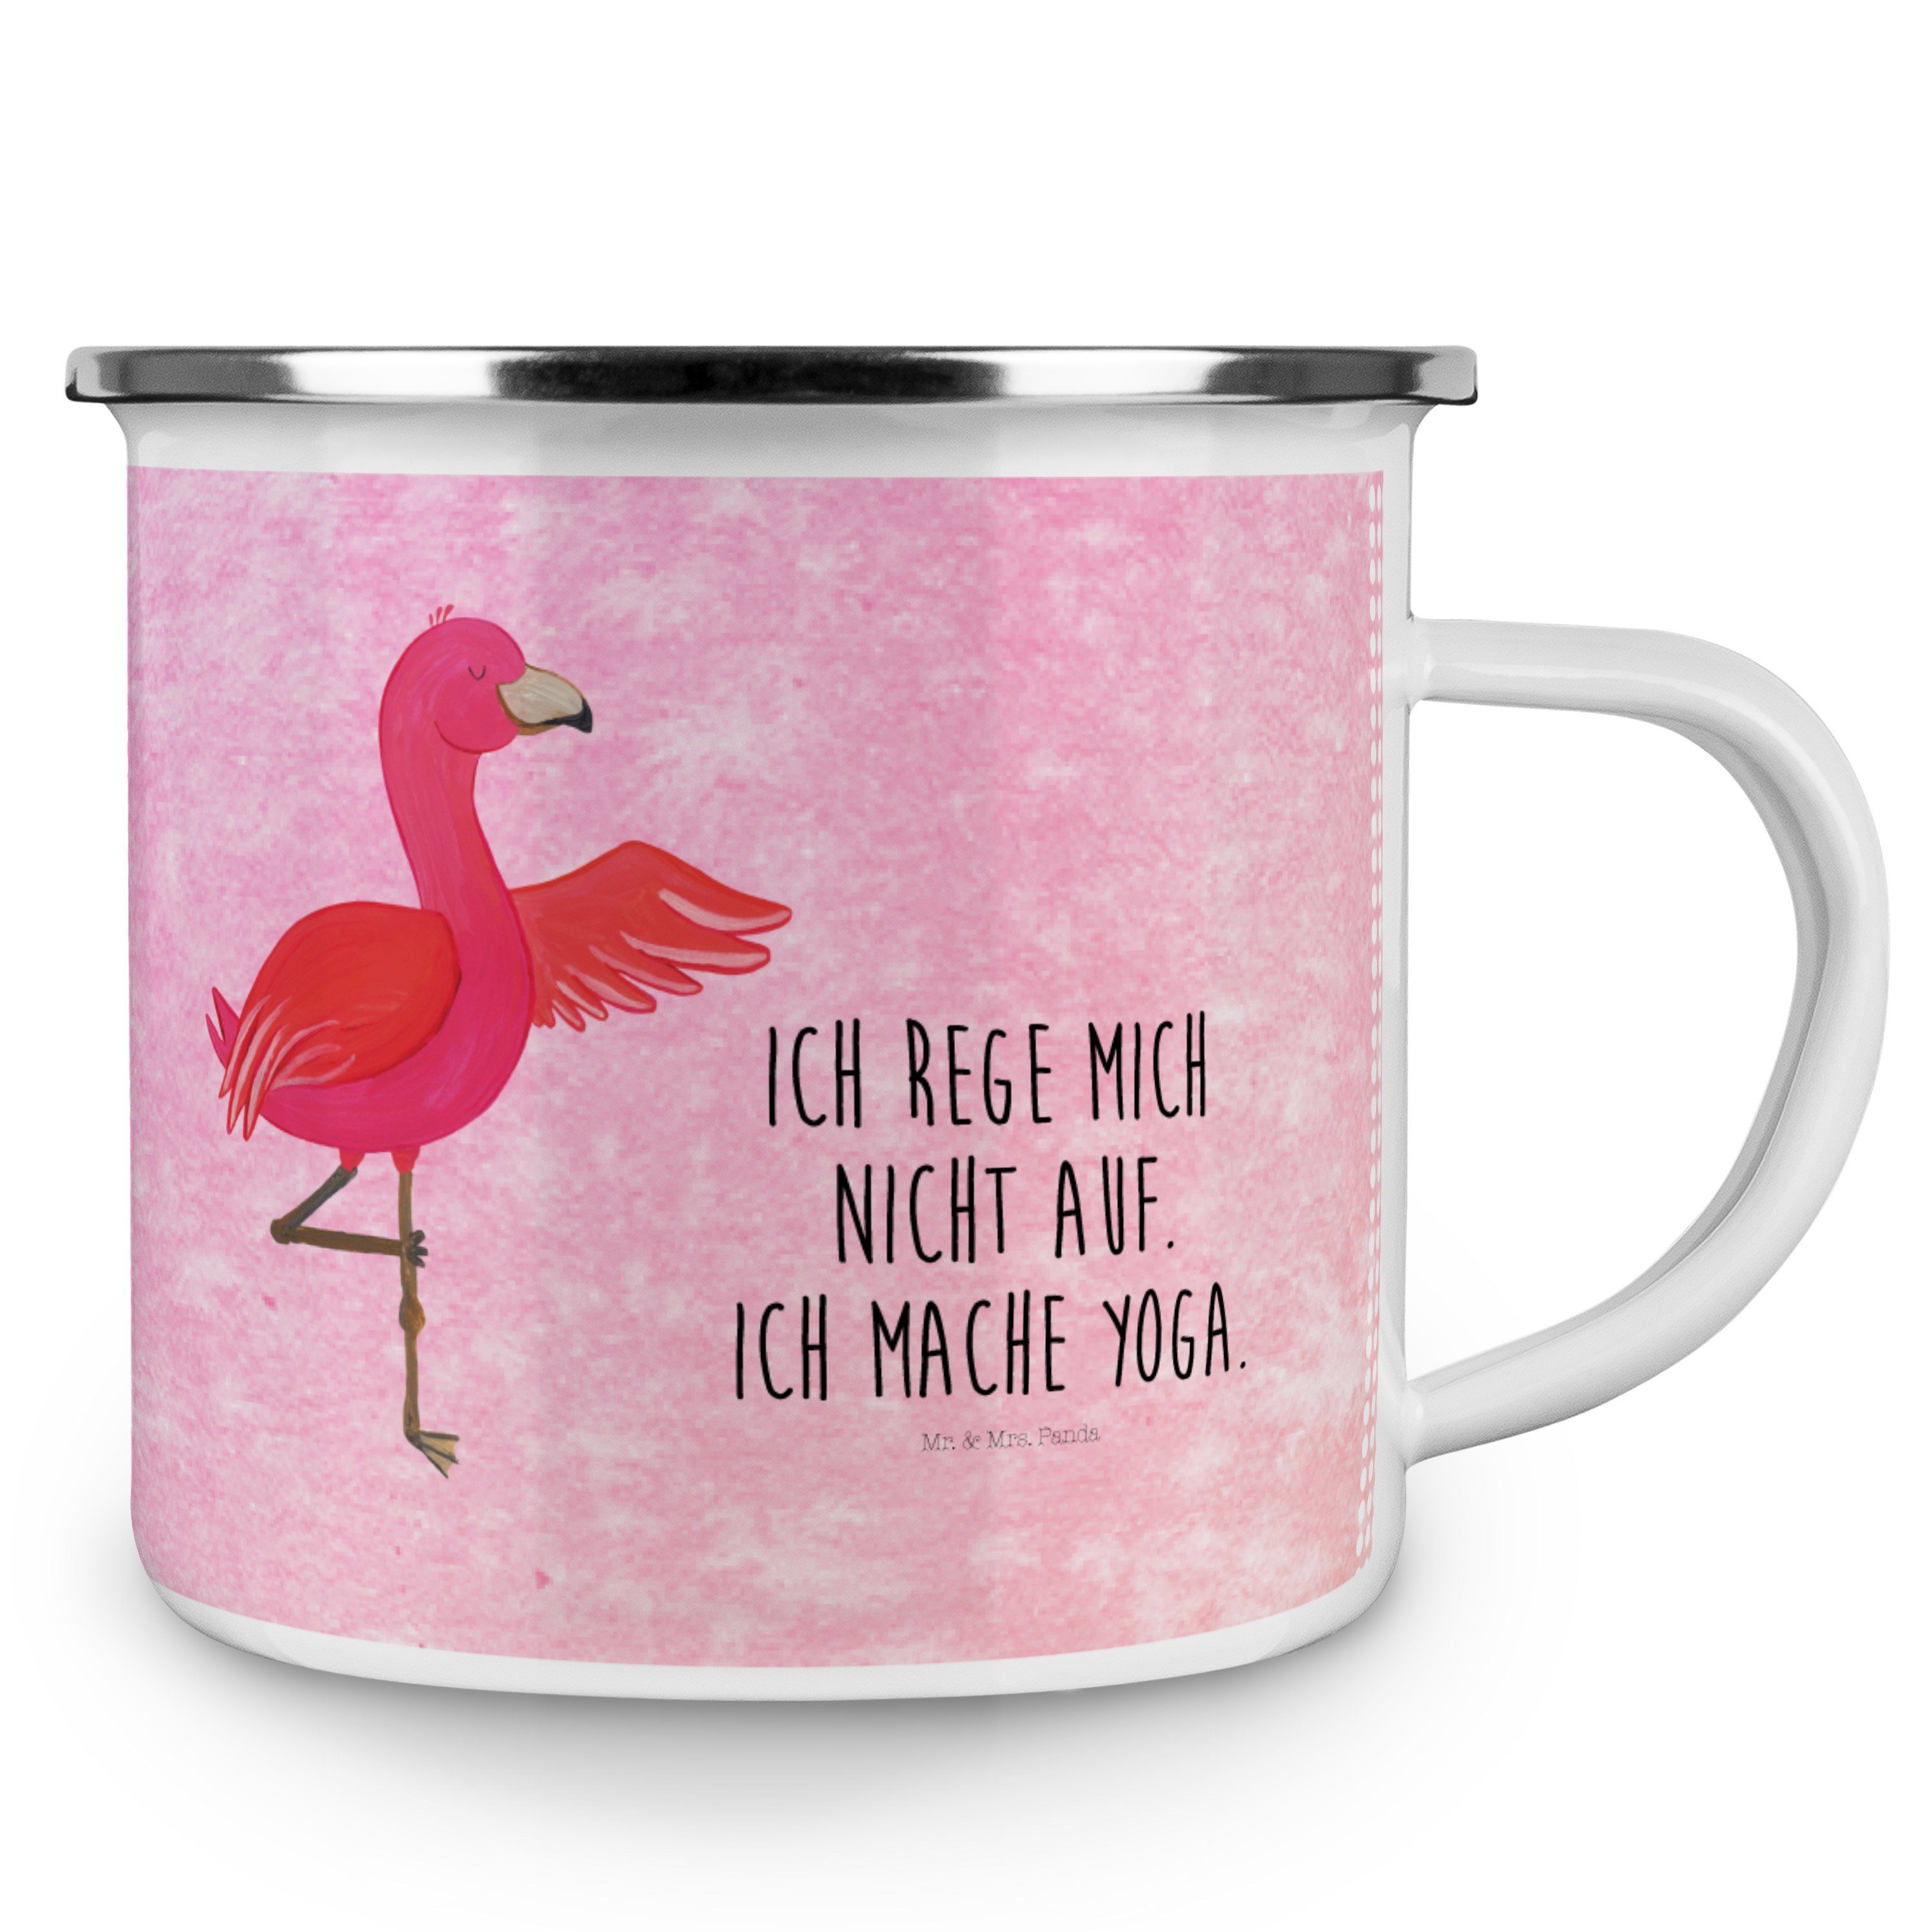 Yoga, Aquarell Campingbecher, - Panda Becher - Yoga Flamingo & Emaille Pink Geschenk, Emaille Mr. Mrs.